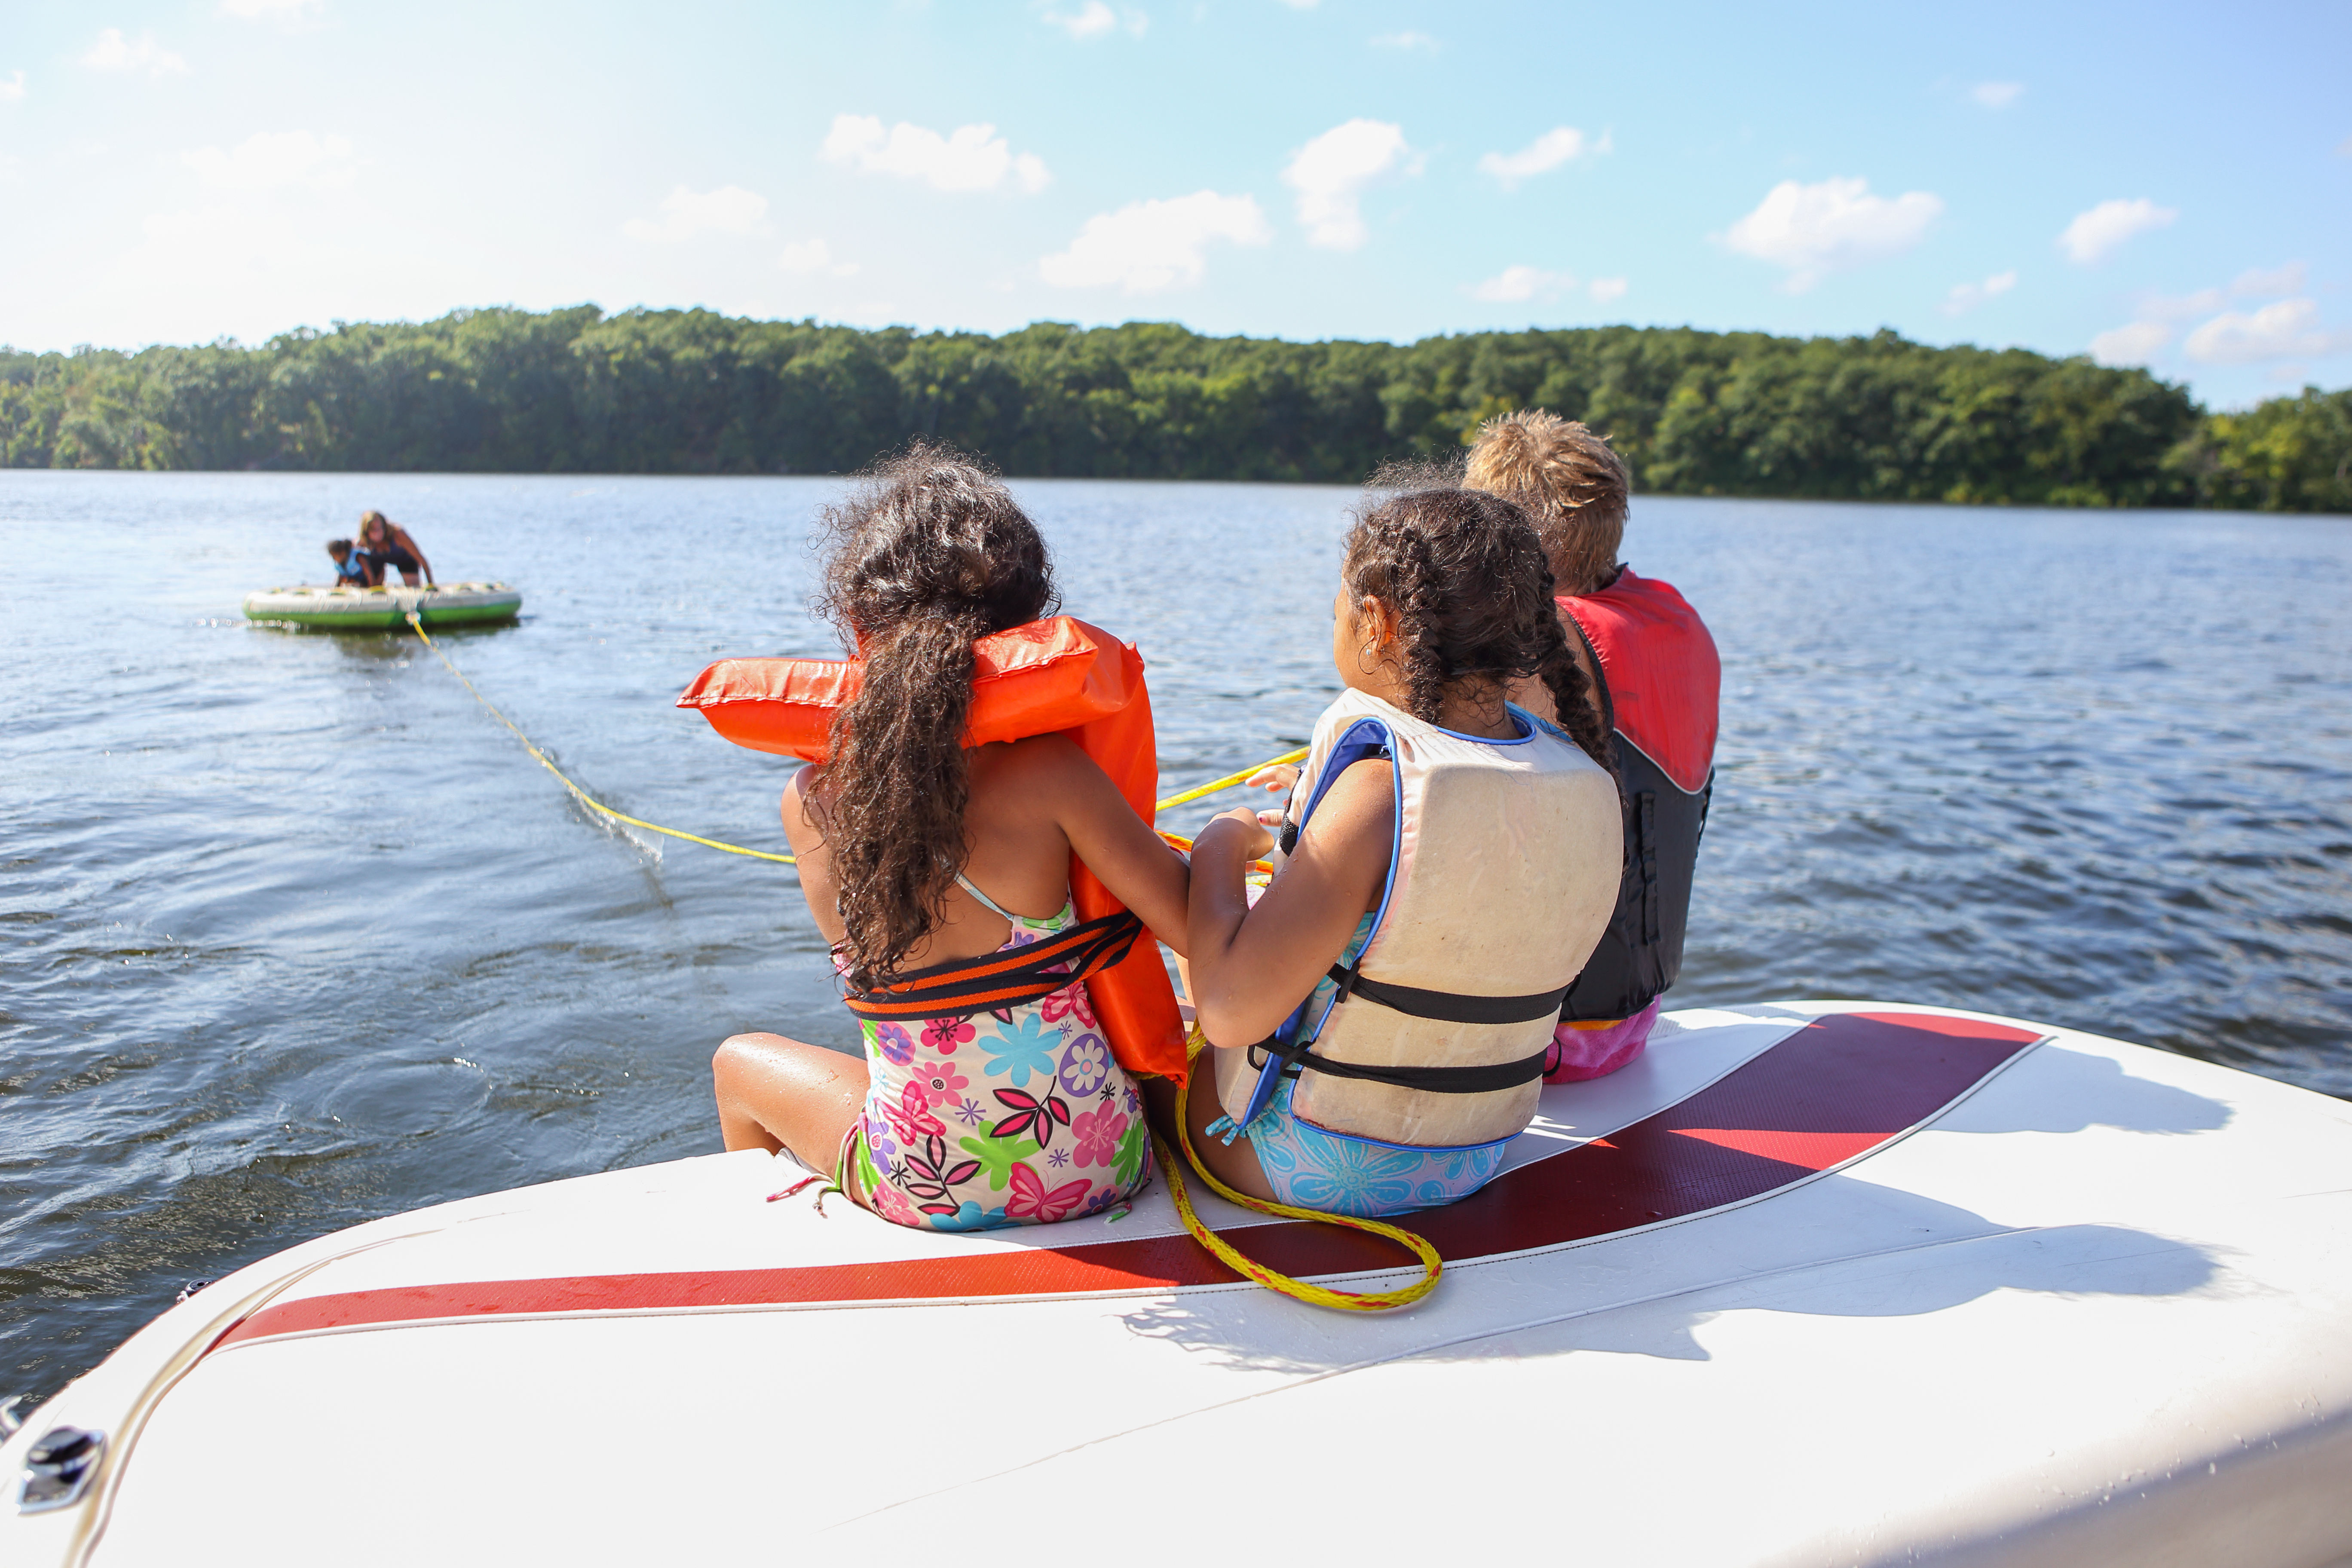 Kids in lifejackets on the back of a boat, safe boating for Labor Day weekend concept.